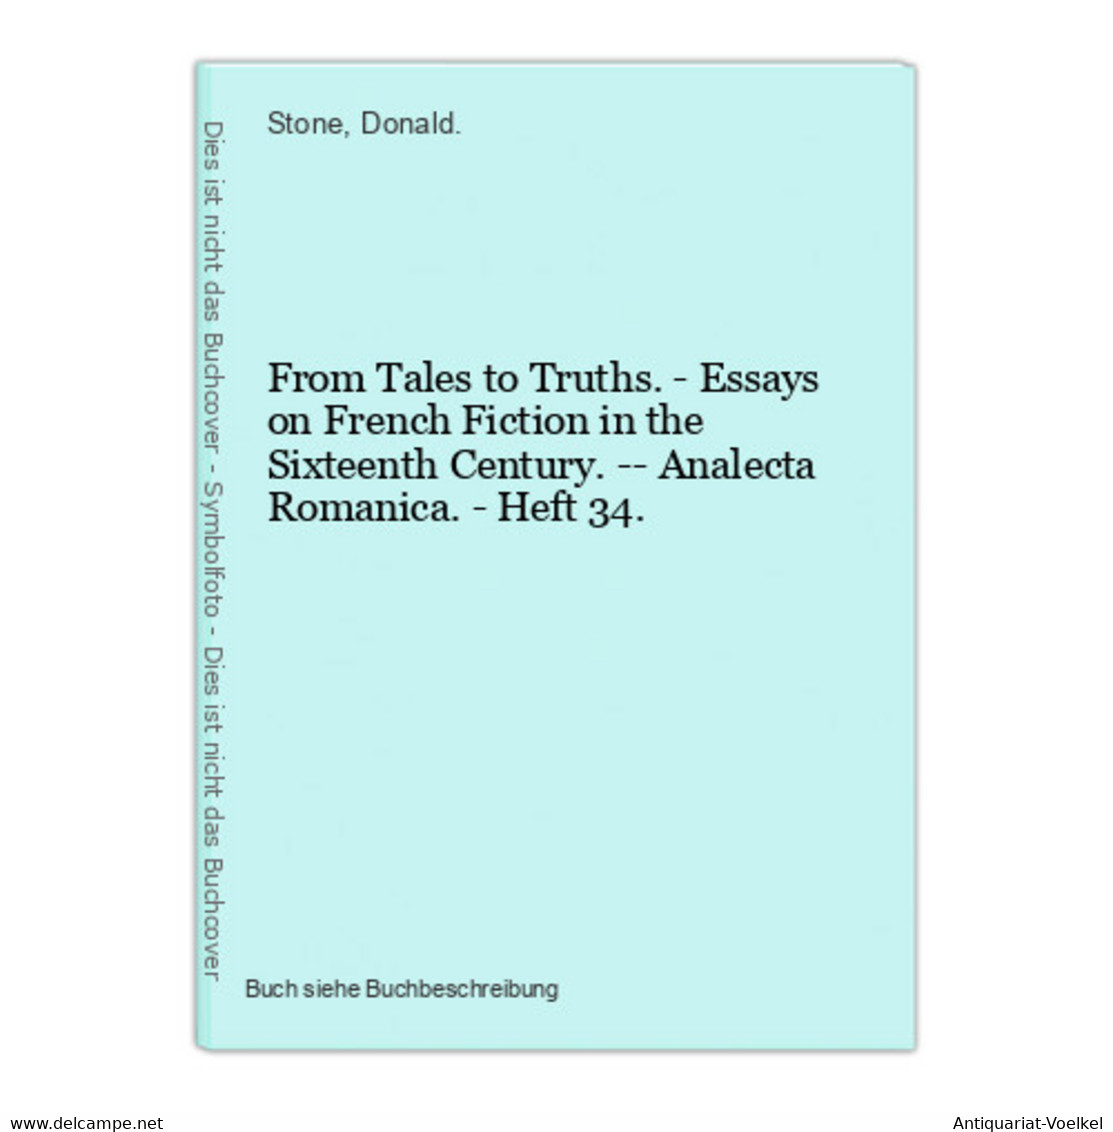 From Tales To Truths. - Essays On French Fiction In The Sixteenth Century. -- Analecta Romanica. - Heft 34. - Auteurs Int.